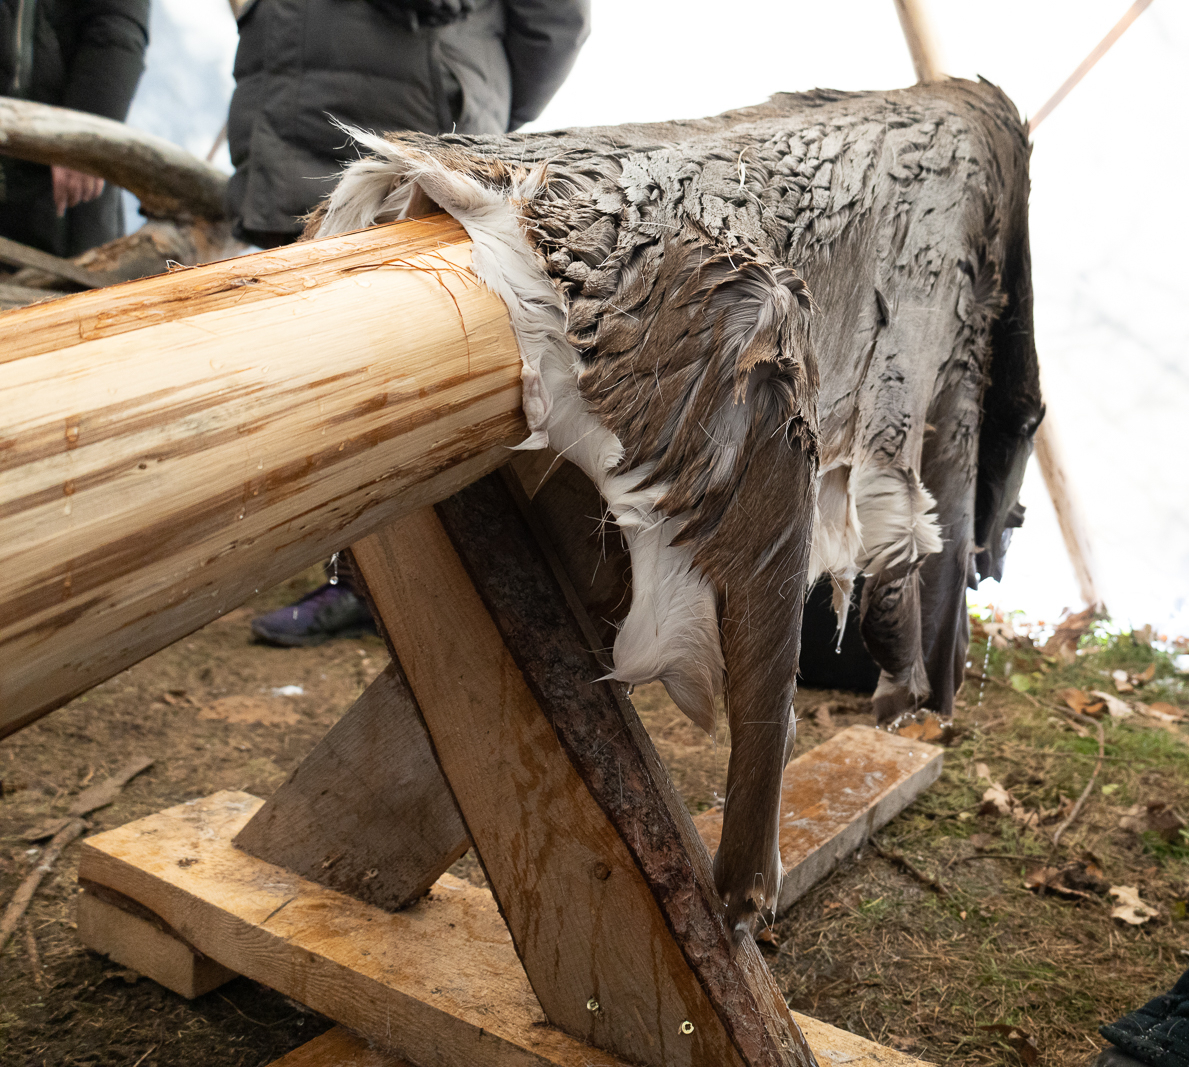 Reclaiming Indigenous traditions, one moose hide at a time